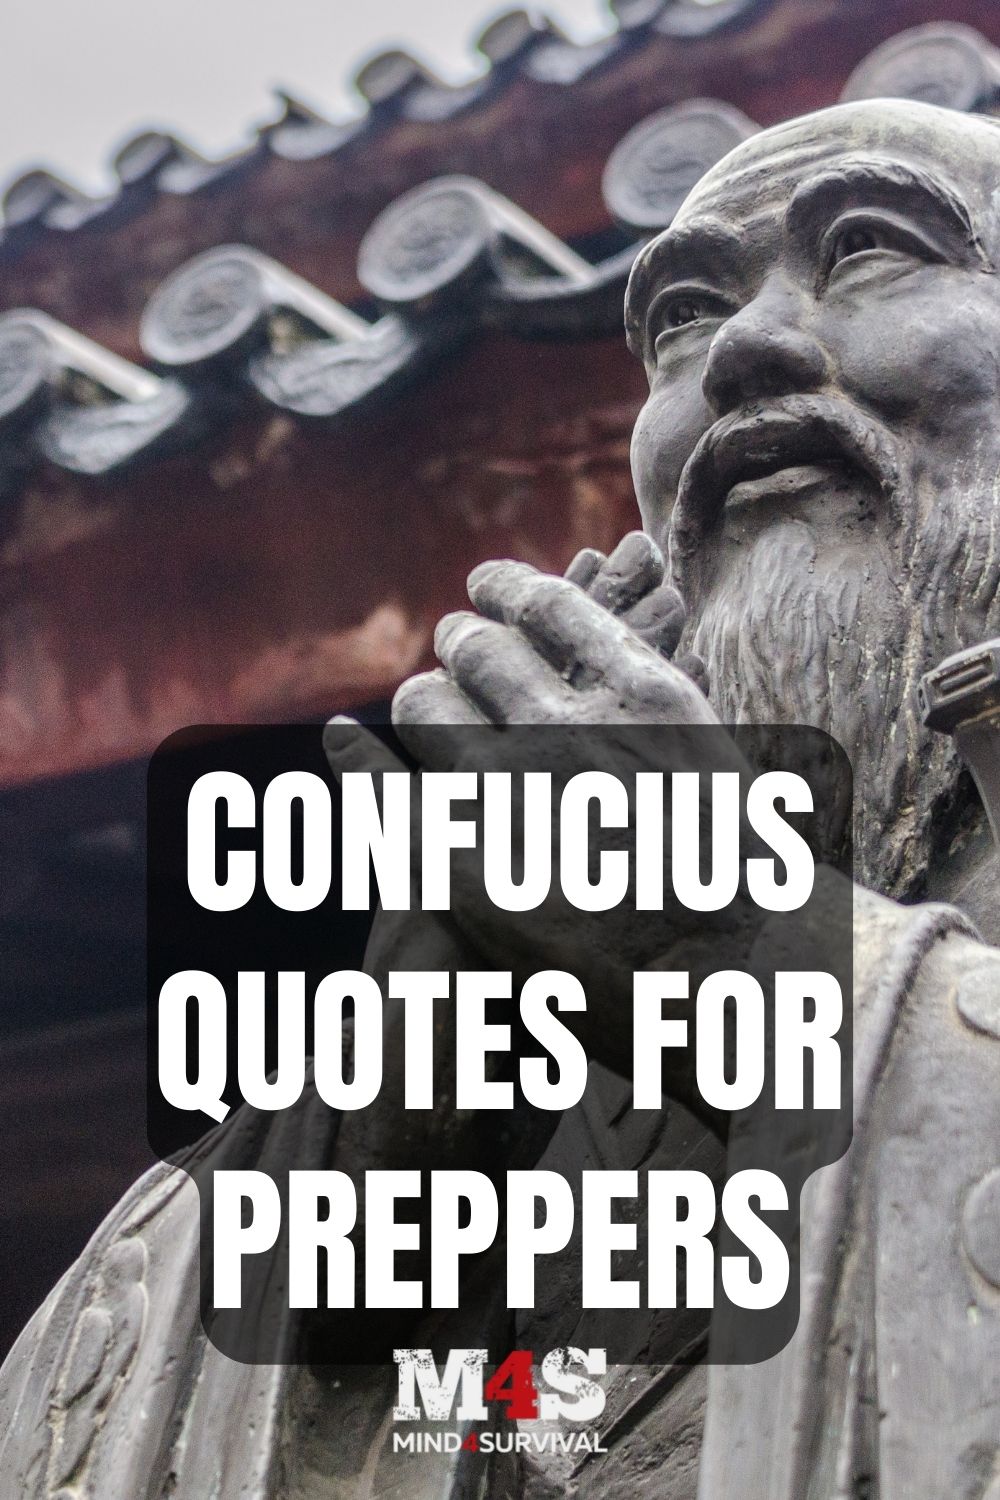 Top 10 Confucius Quotes For Preppers